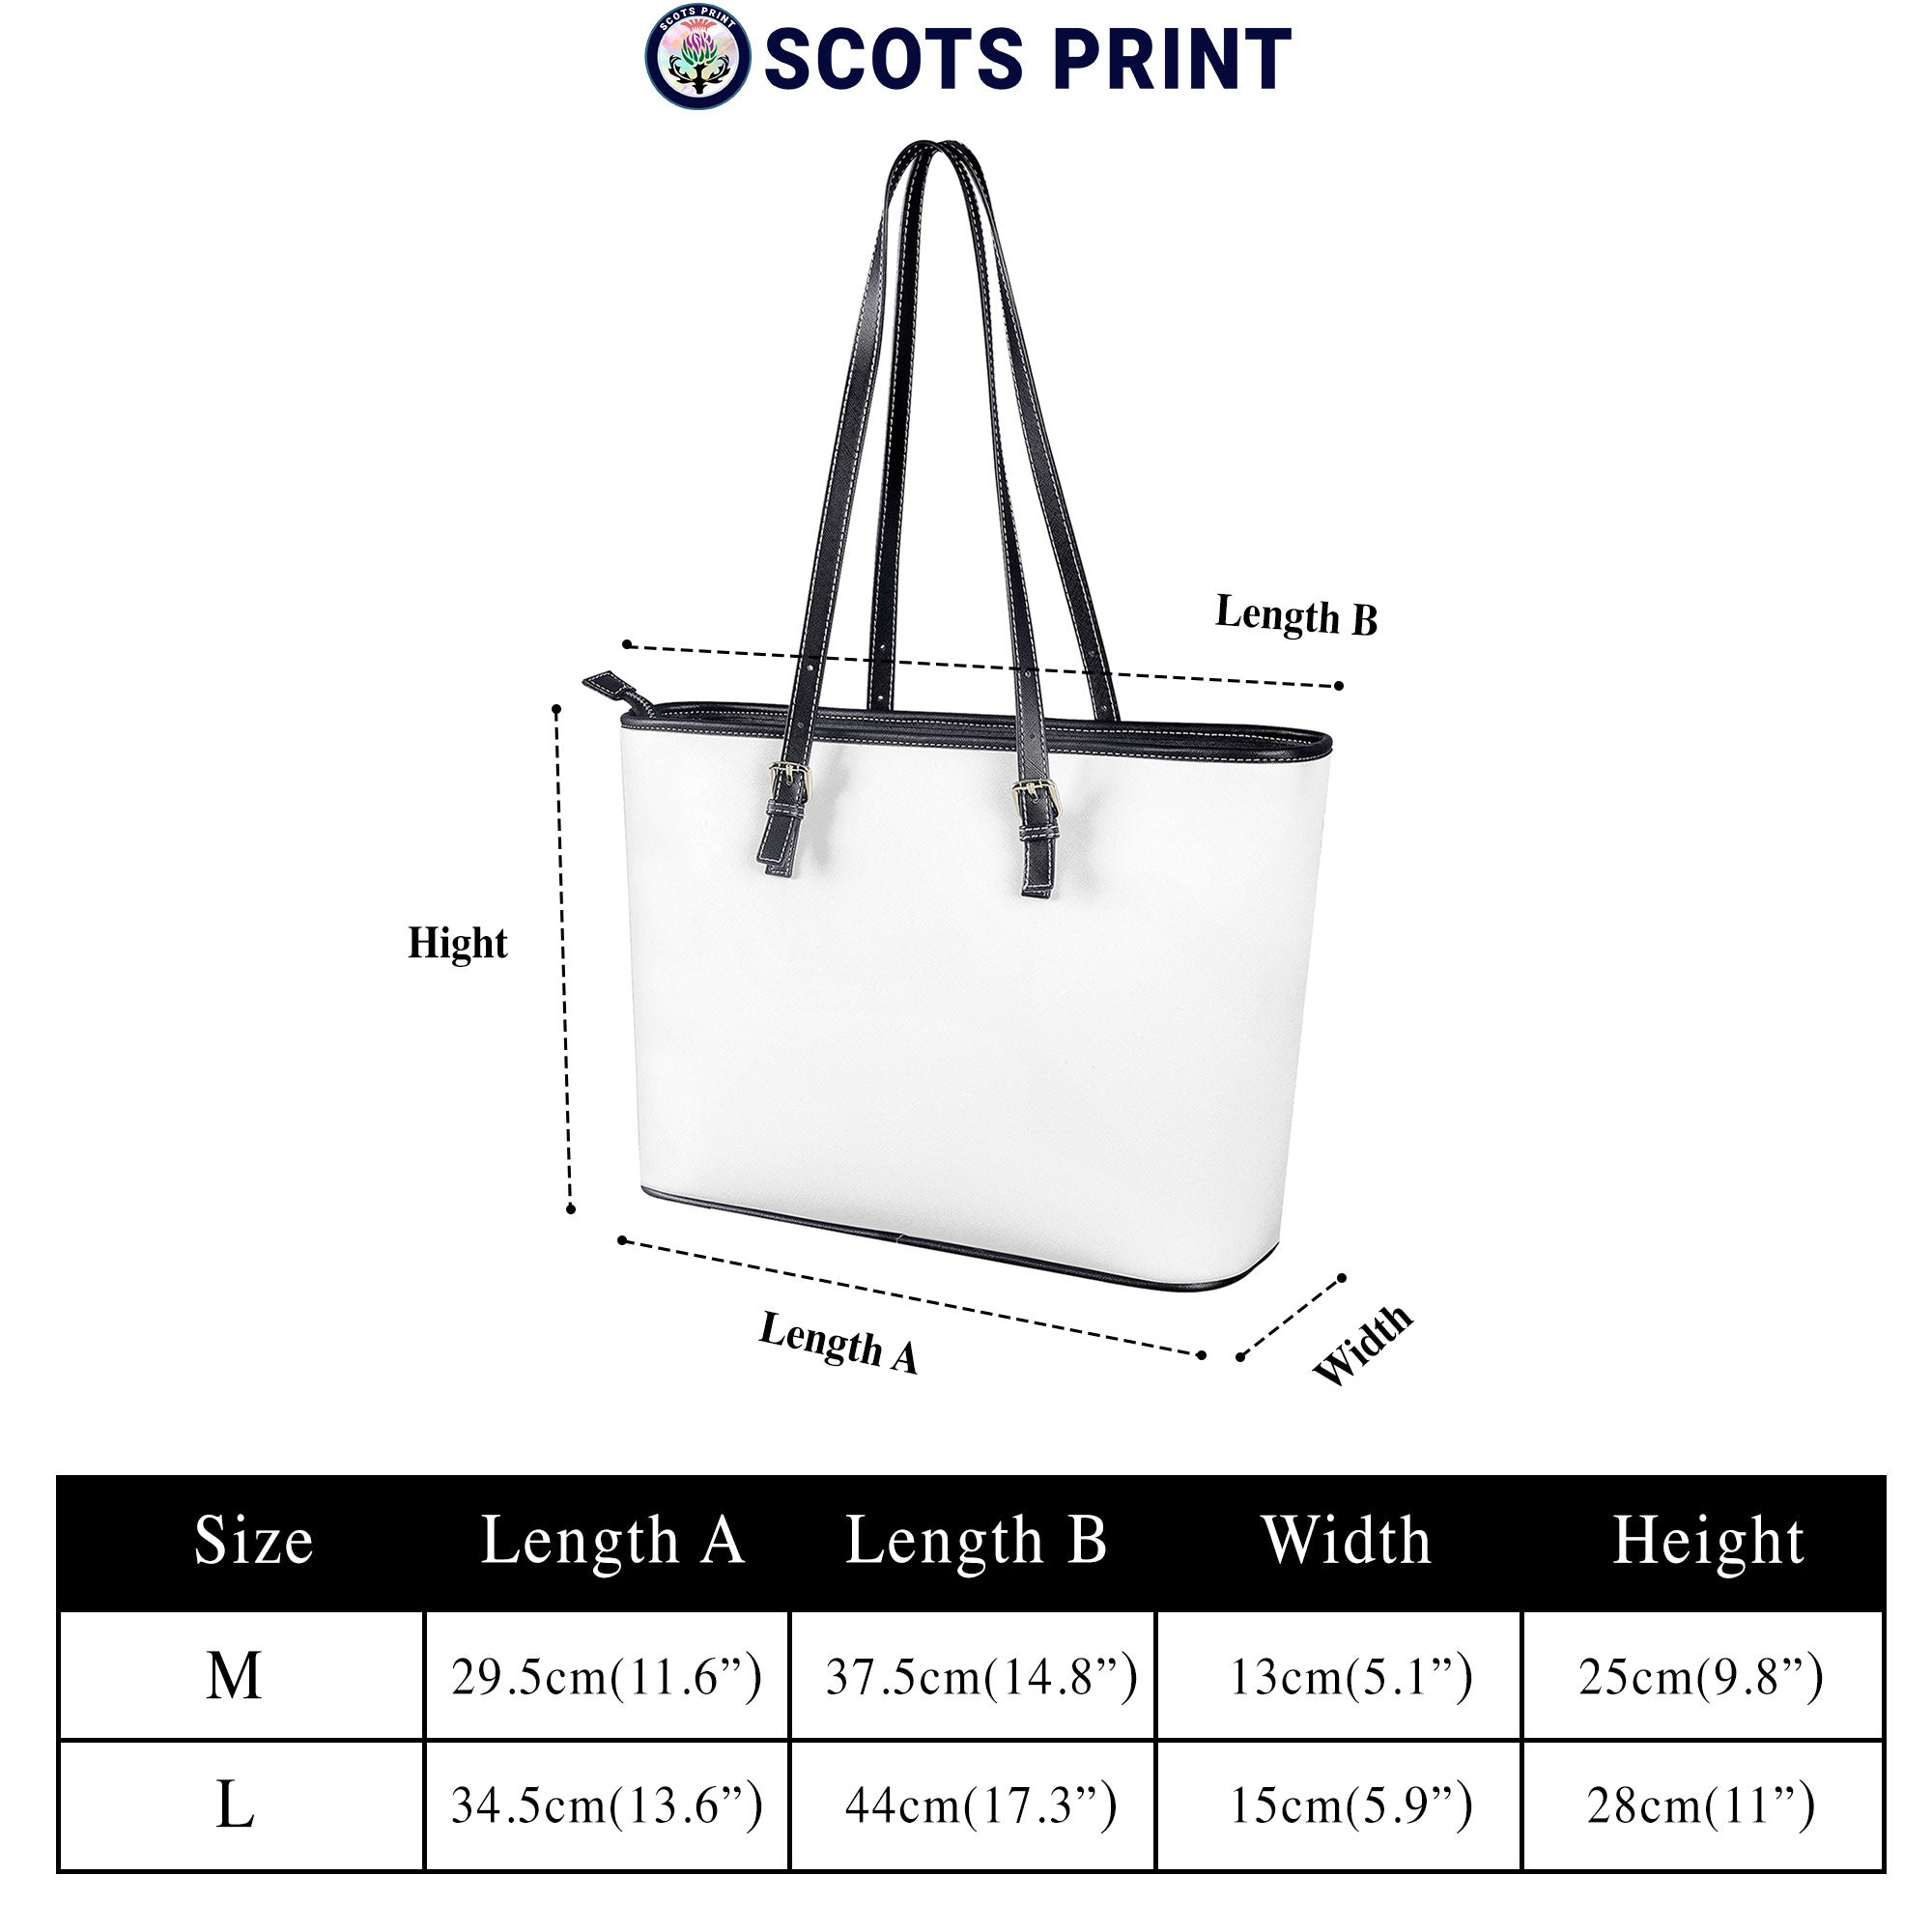 Keith Ancient Tartan Crest Leather Tote Bag